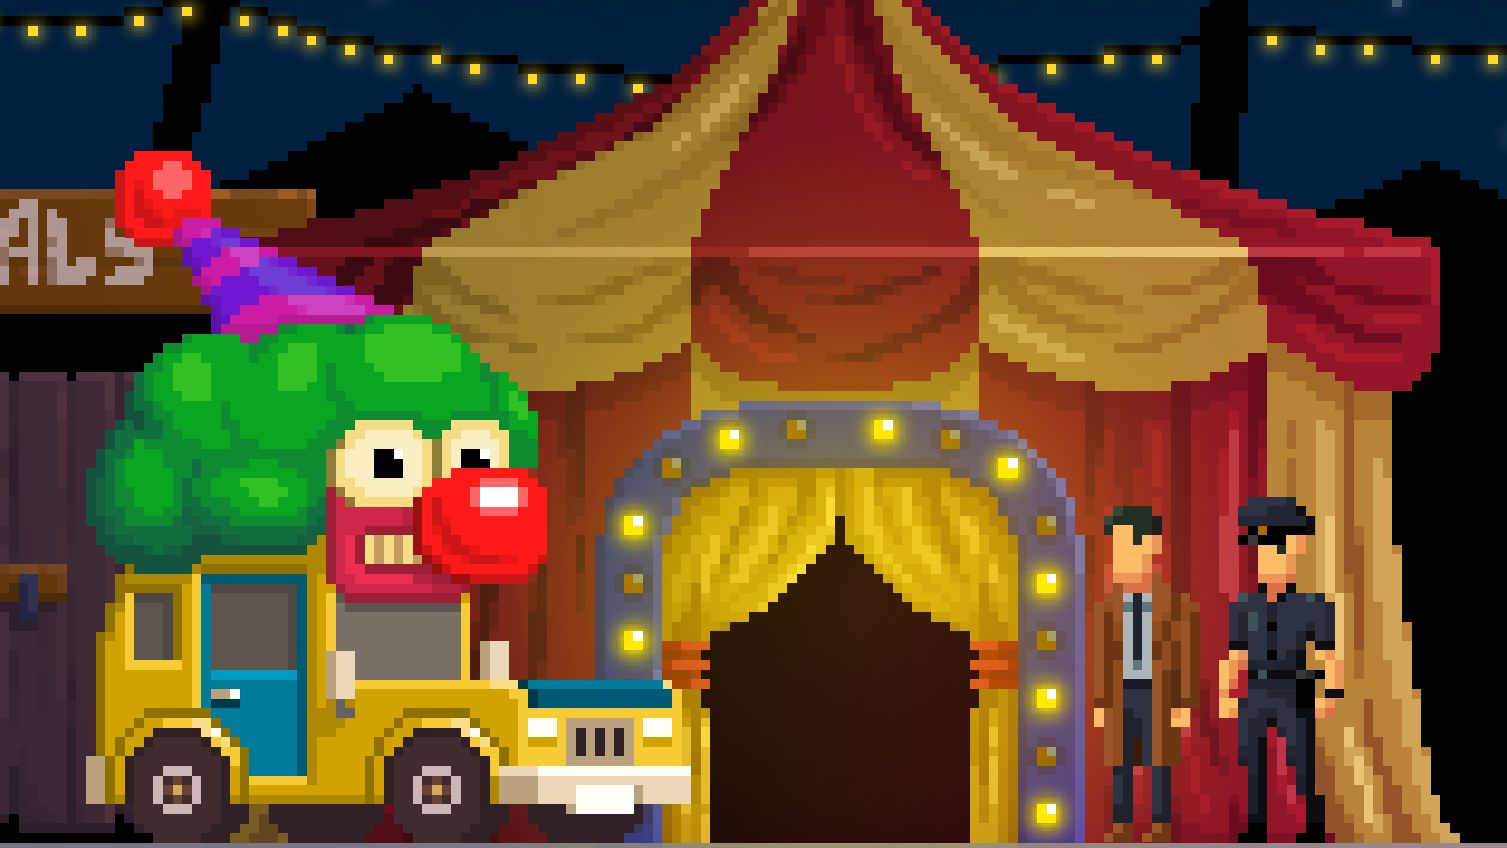 Detective McQueen and Officer Dooley stand in front of a yellow and red striped circus tent. They are looking at a yellow clown car, which has a giant grimacing clown face on top of it/